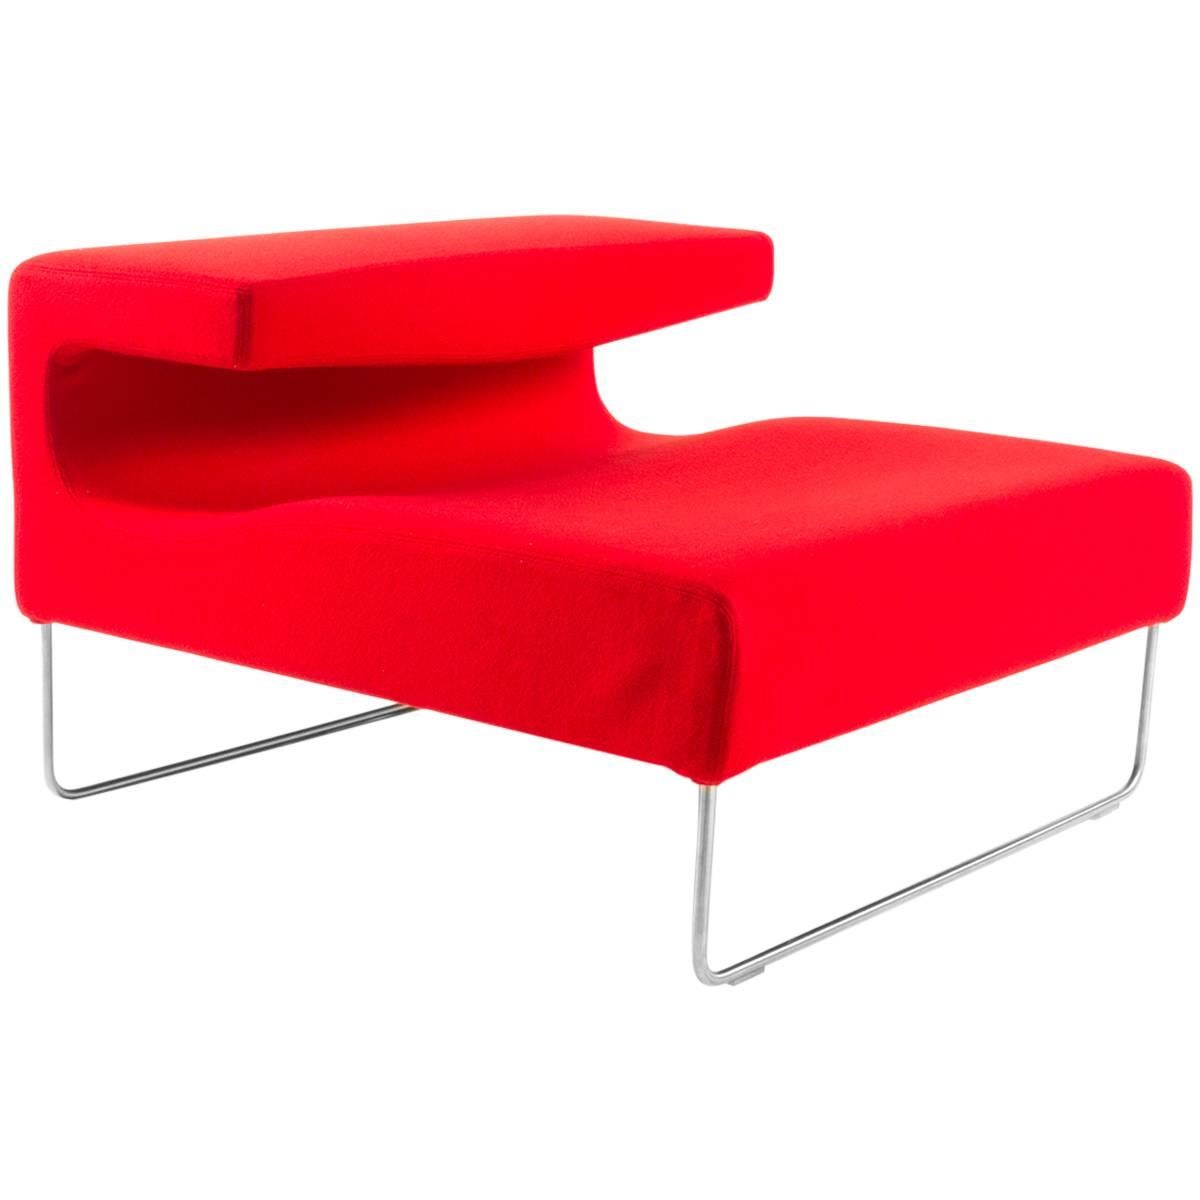 Moroso Red Lowseat Chair by Patricia Urquiola, Italy For Sale